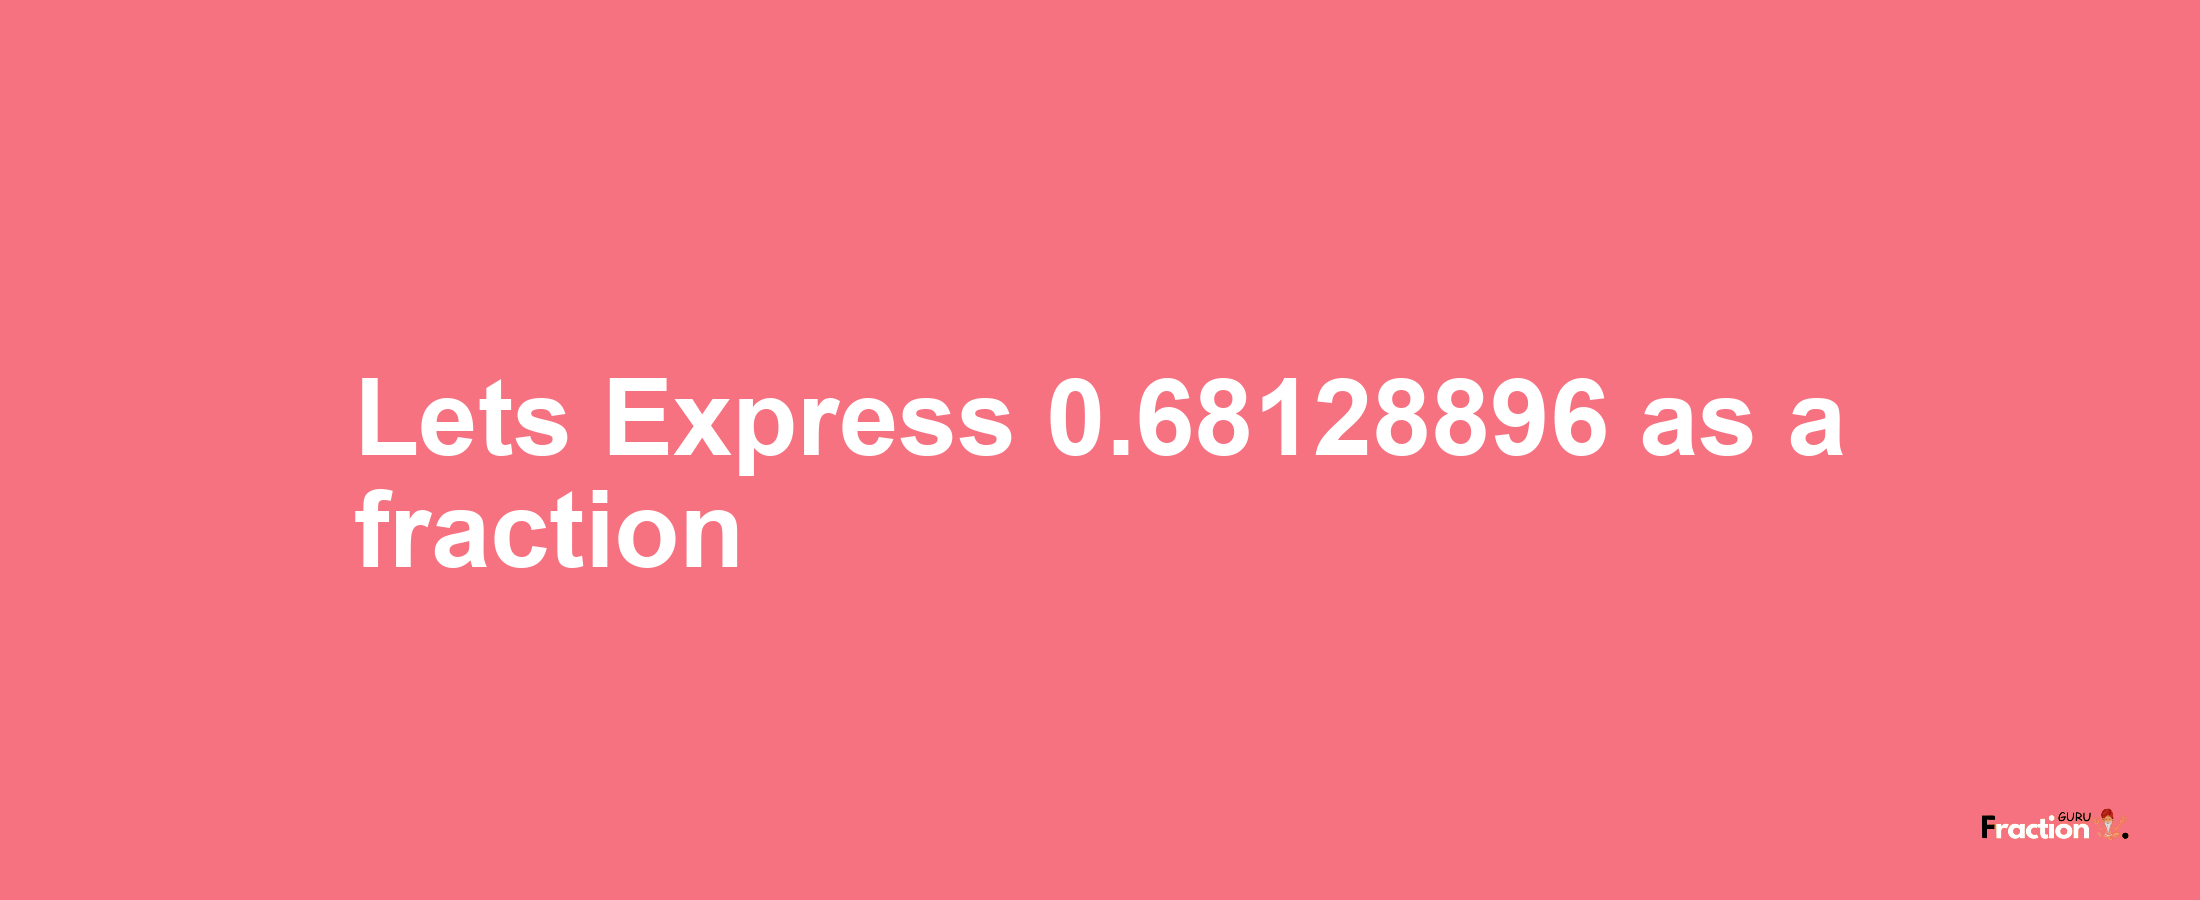 Lets Express 0.68128896 as afraction